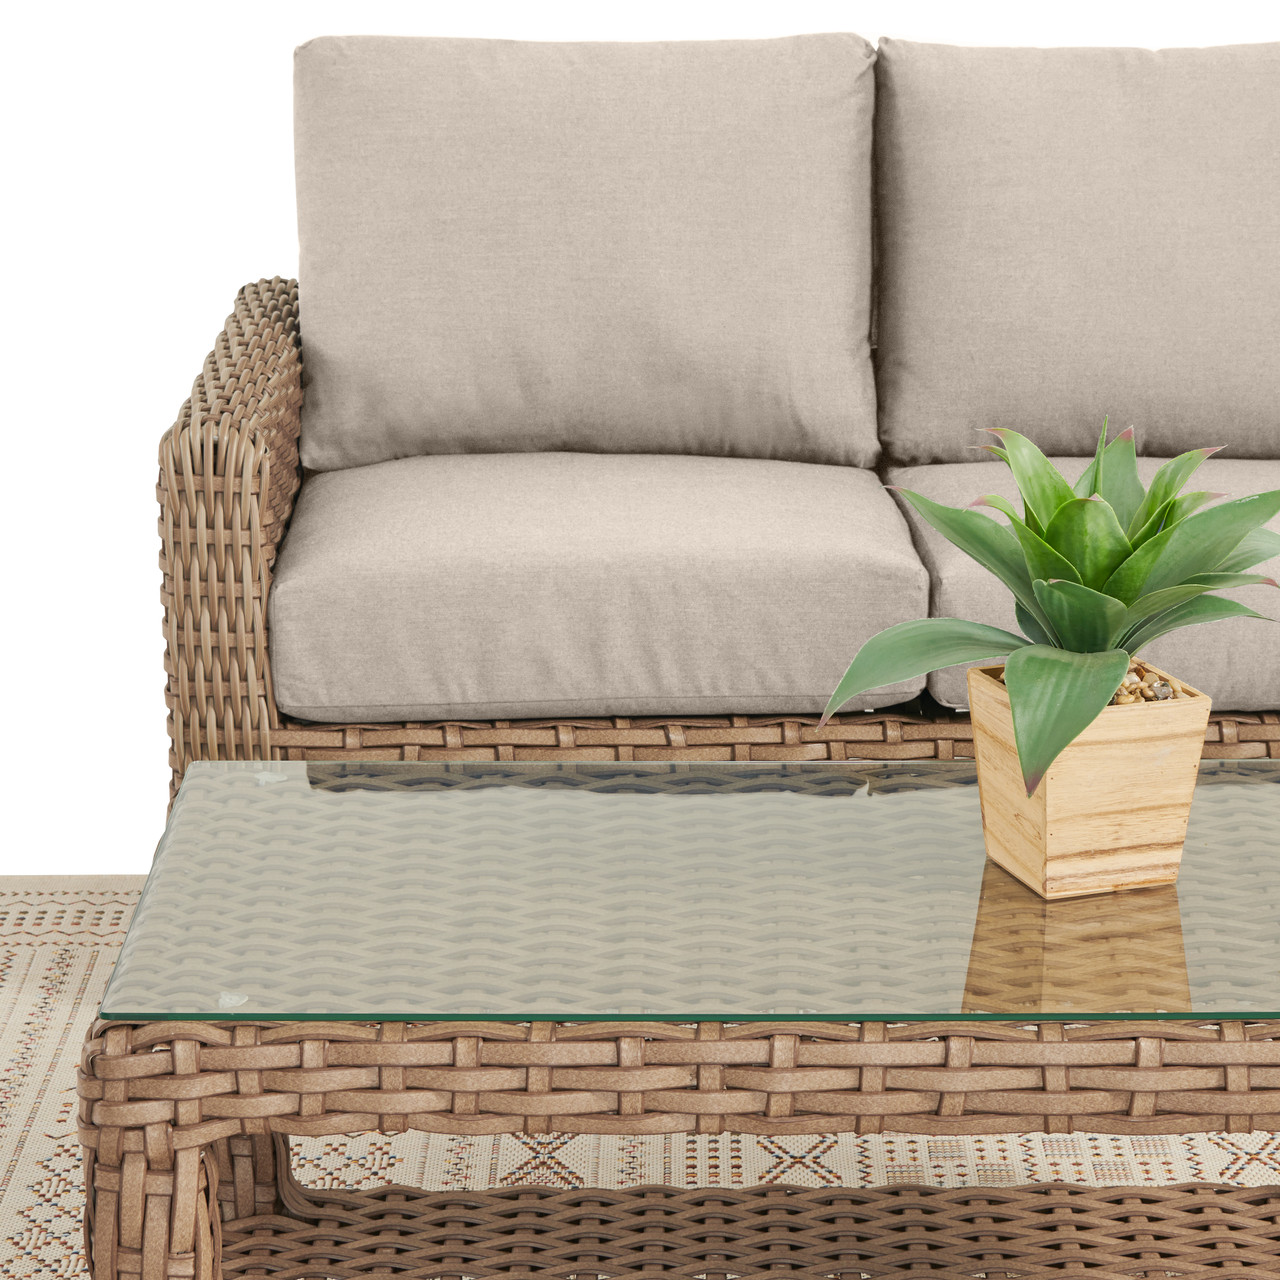 Siesta Aged Teak Outdoor Wicker with Cushions 4 Piece Loveseat Group + 42 x 24 in. Coffee Table